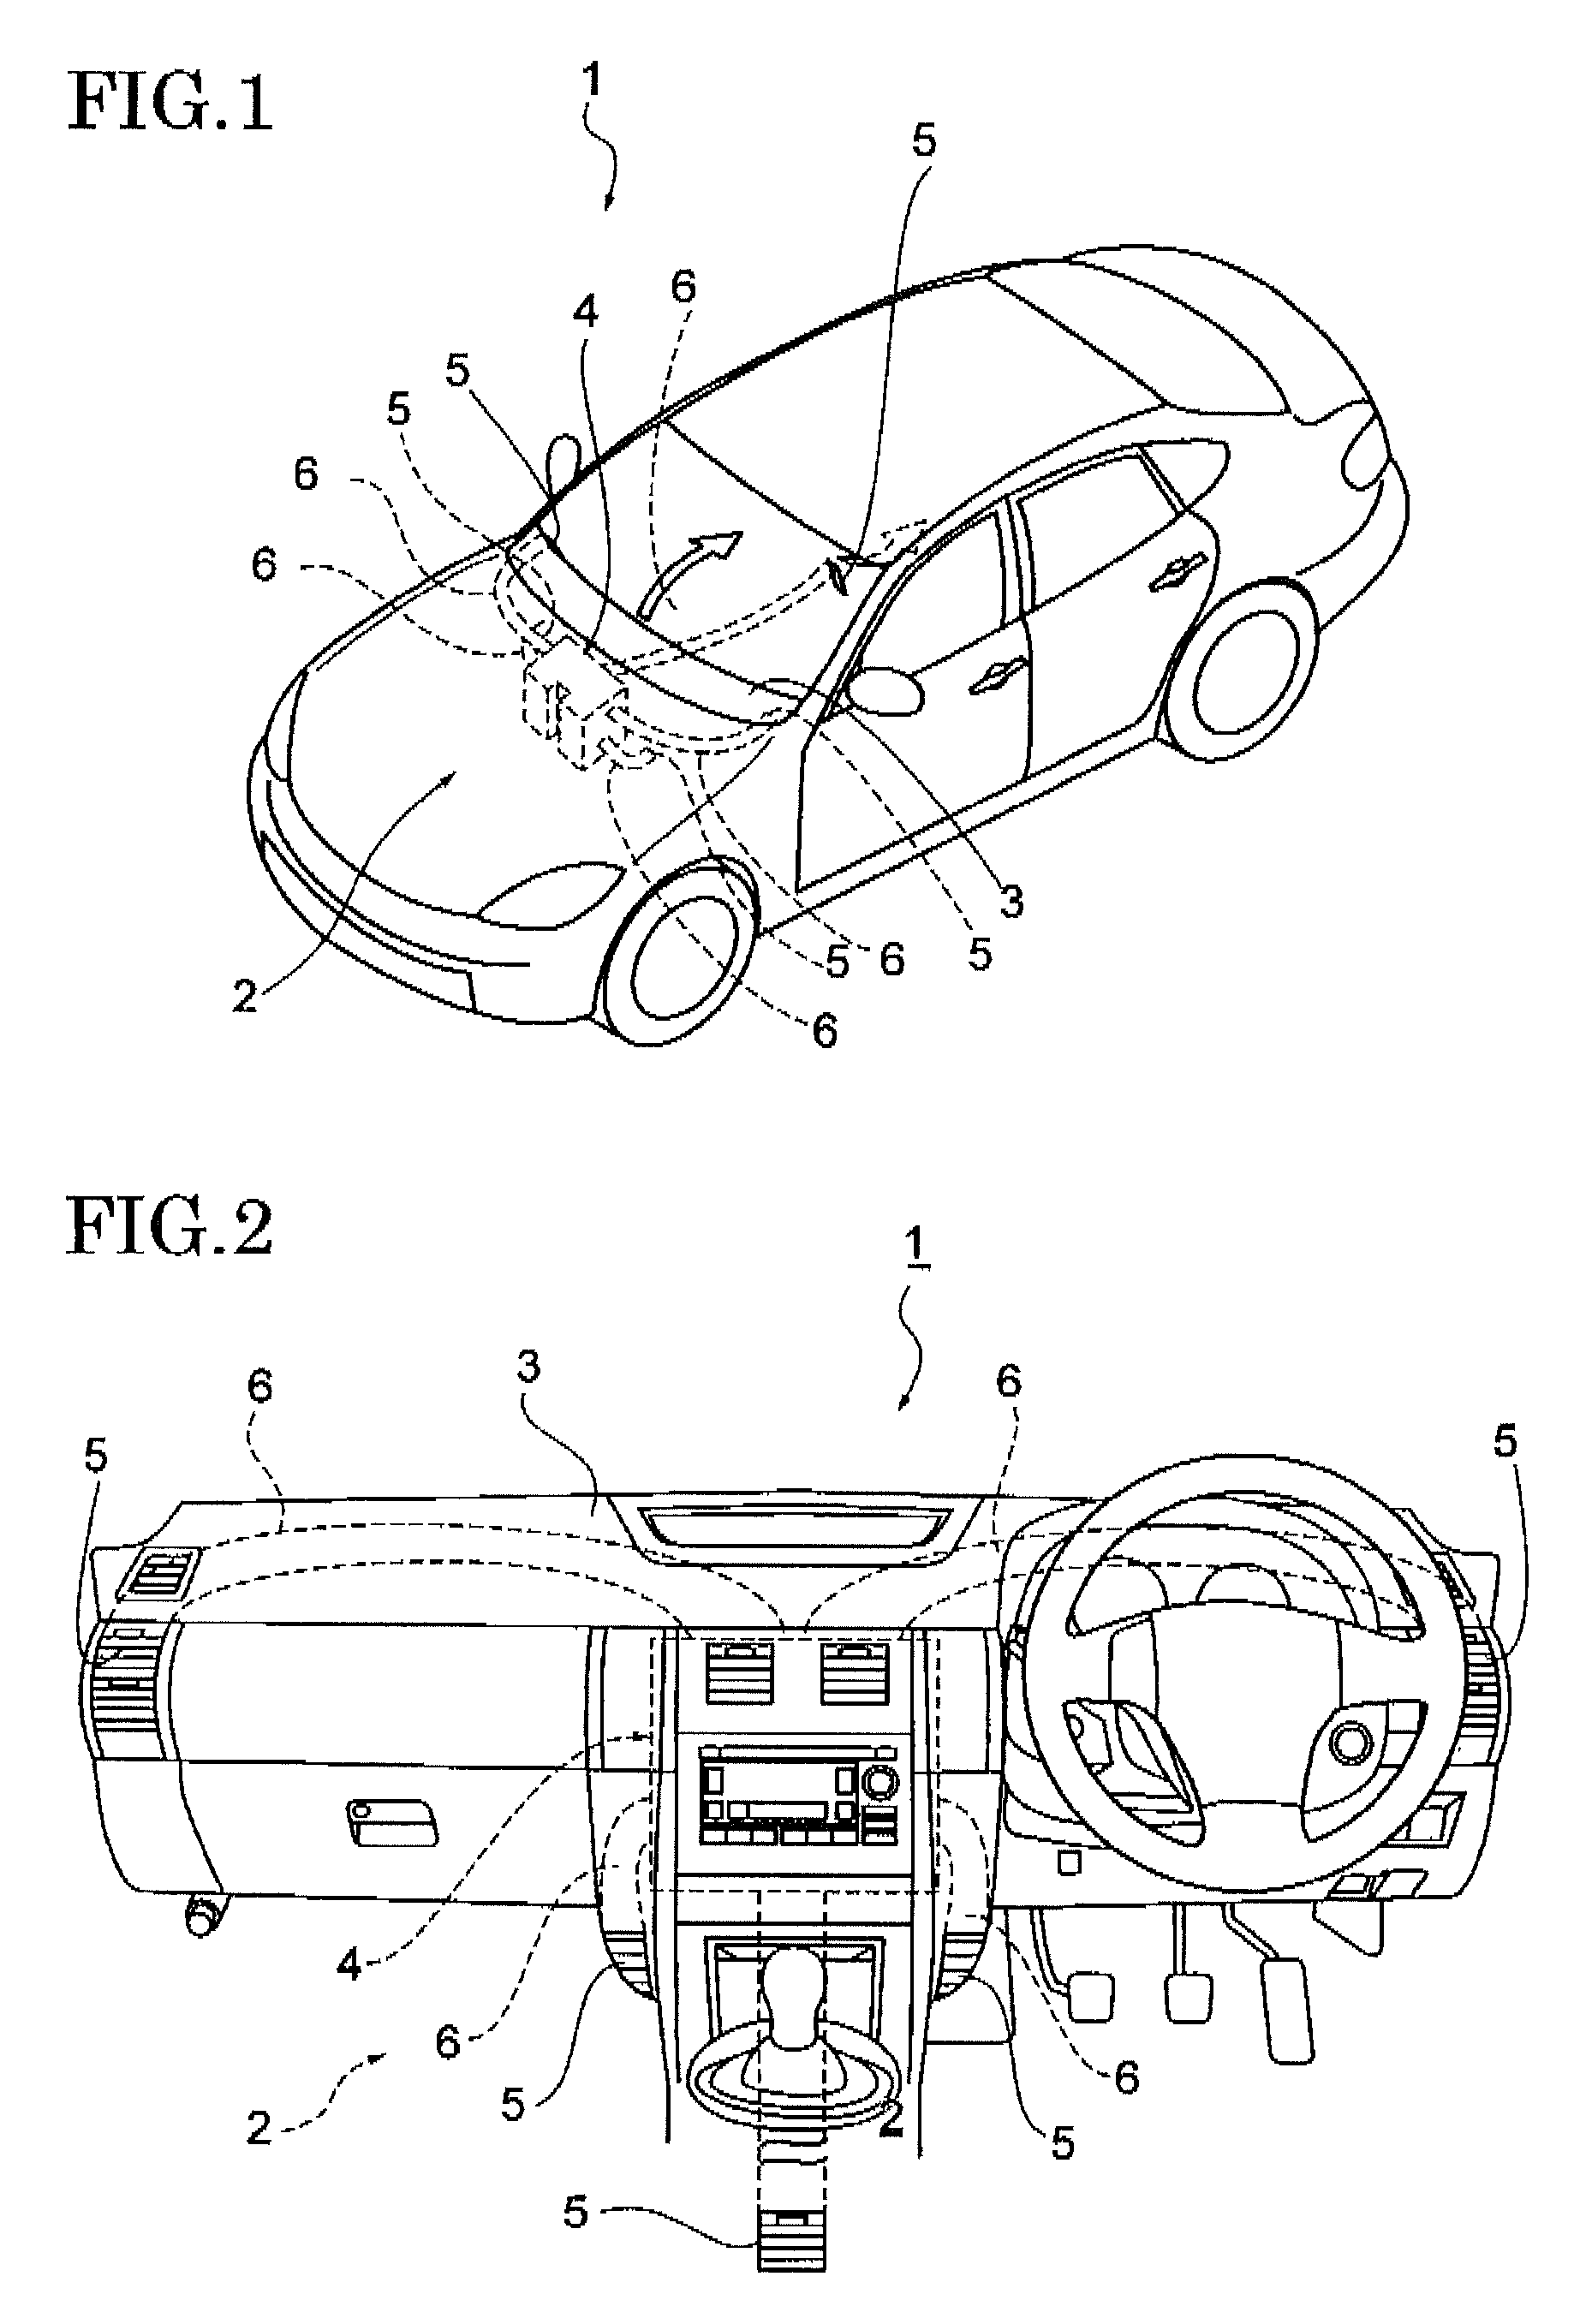 Mix door and vehicle air conditioner using the same